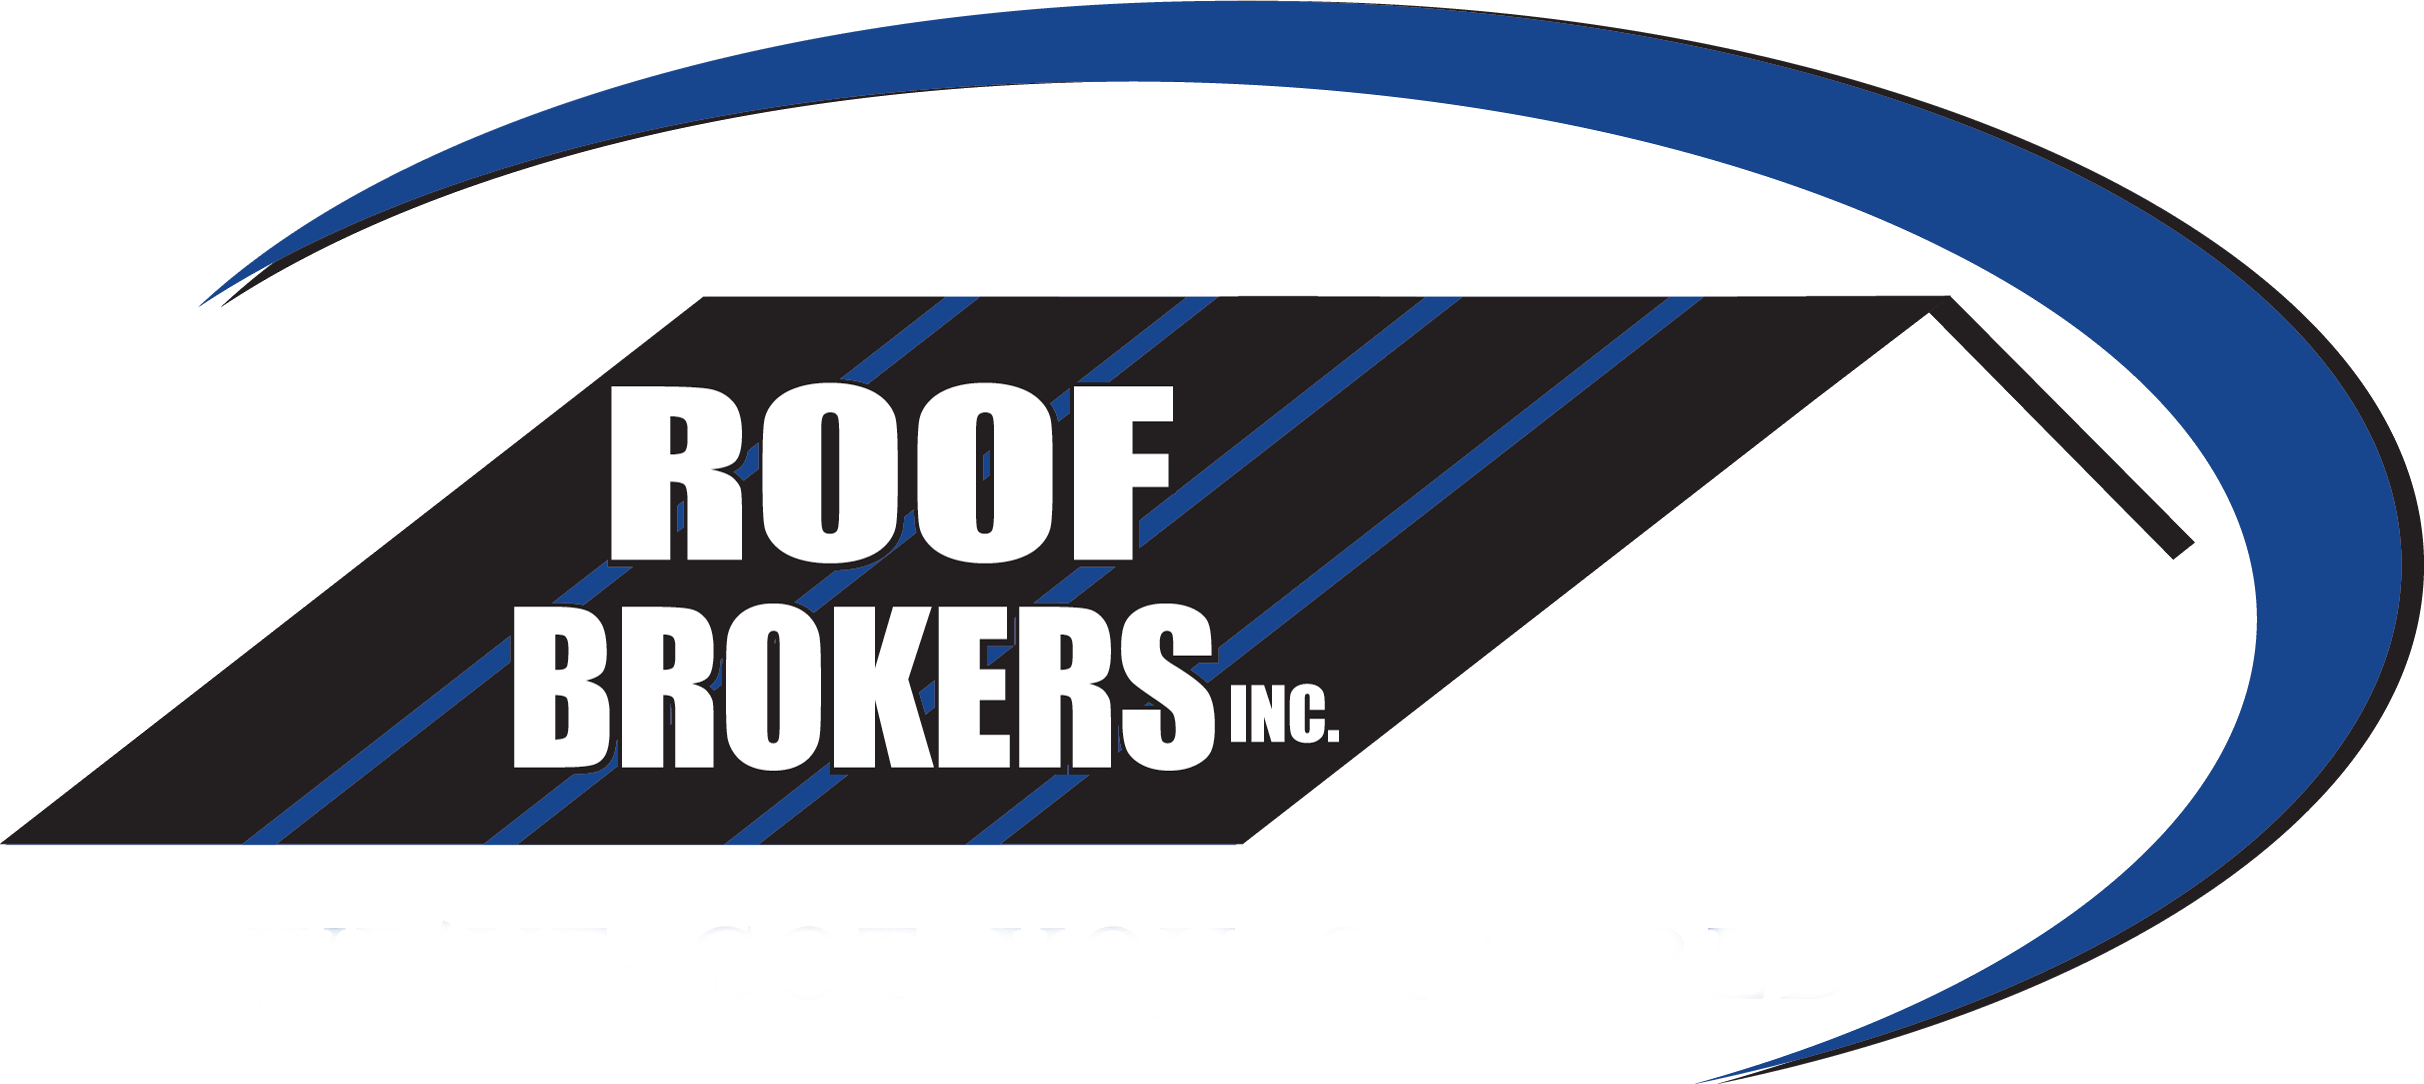 Home Roof Logo - Home - Roof Brokers